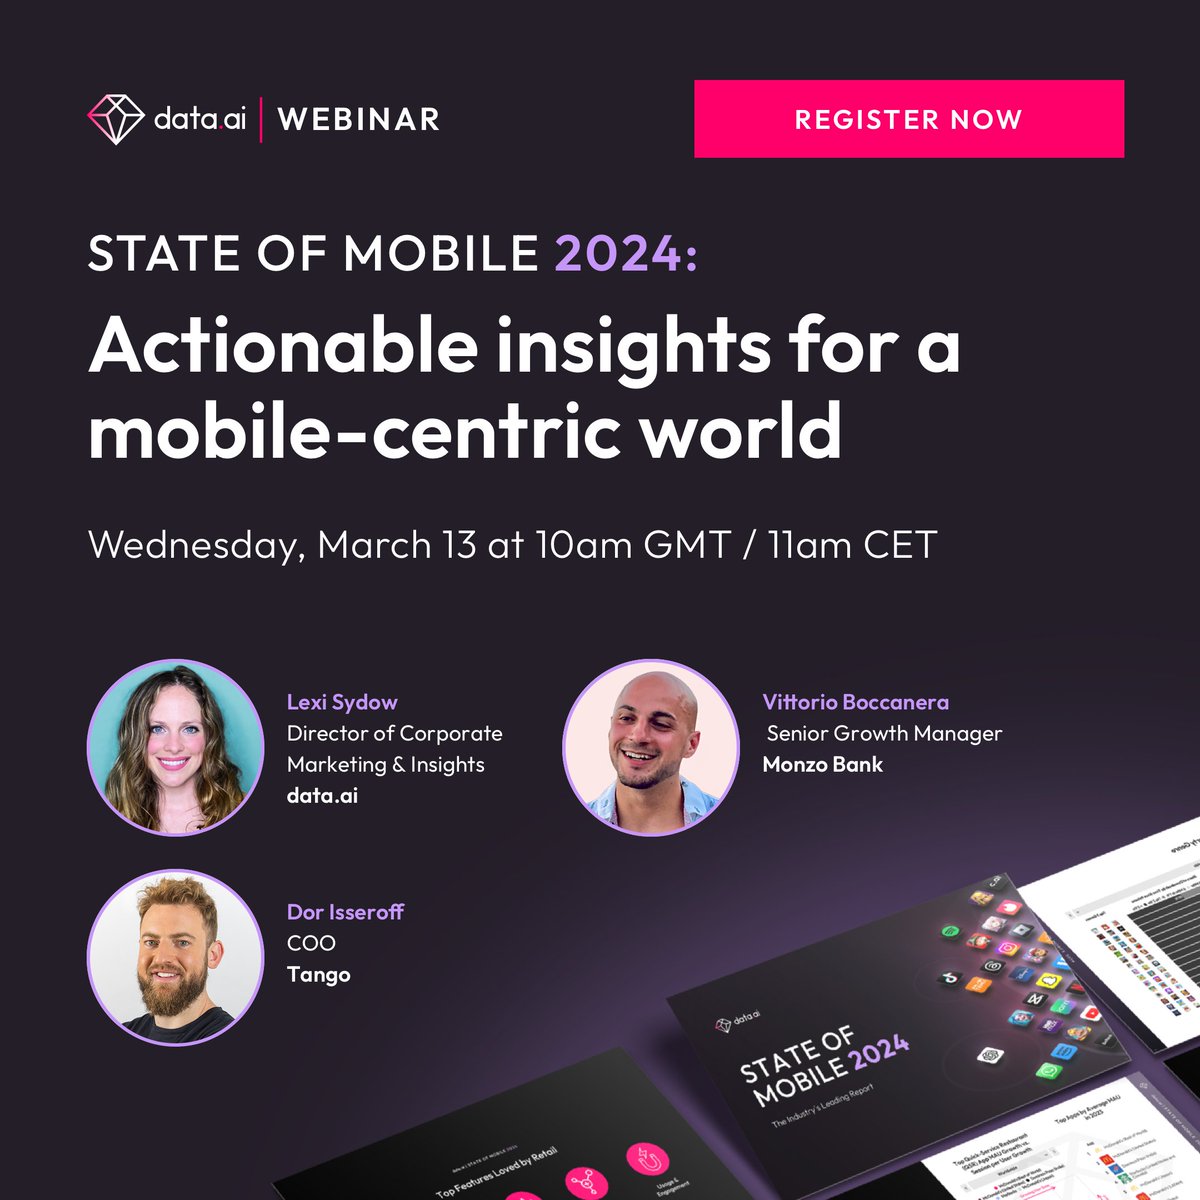 Last chance to register for the State of Mobile 2024 Webinar. March 13, at 10 am GMT / 11 am CET Hear from @lexisydow from data.ai, Dor Issoroff (Tango), Vittorio Boccanera (Monzo) as they uncover mobile industry trends, insights, and emerging categories…